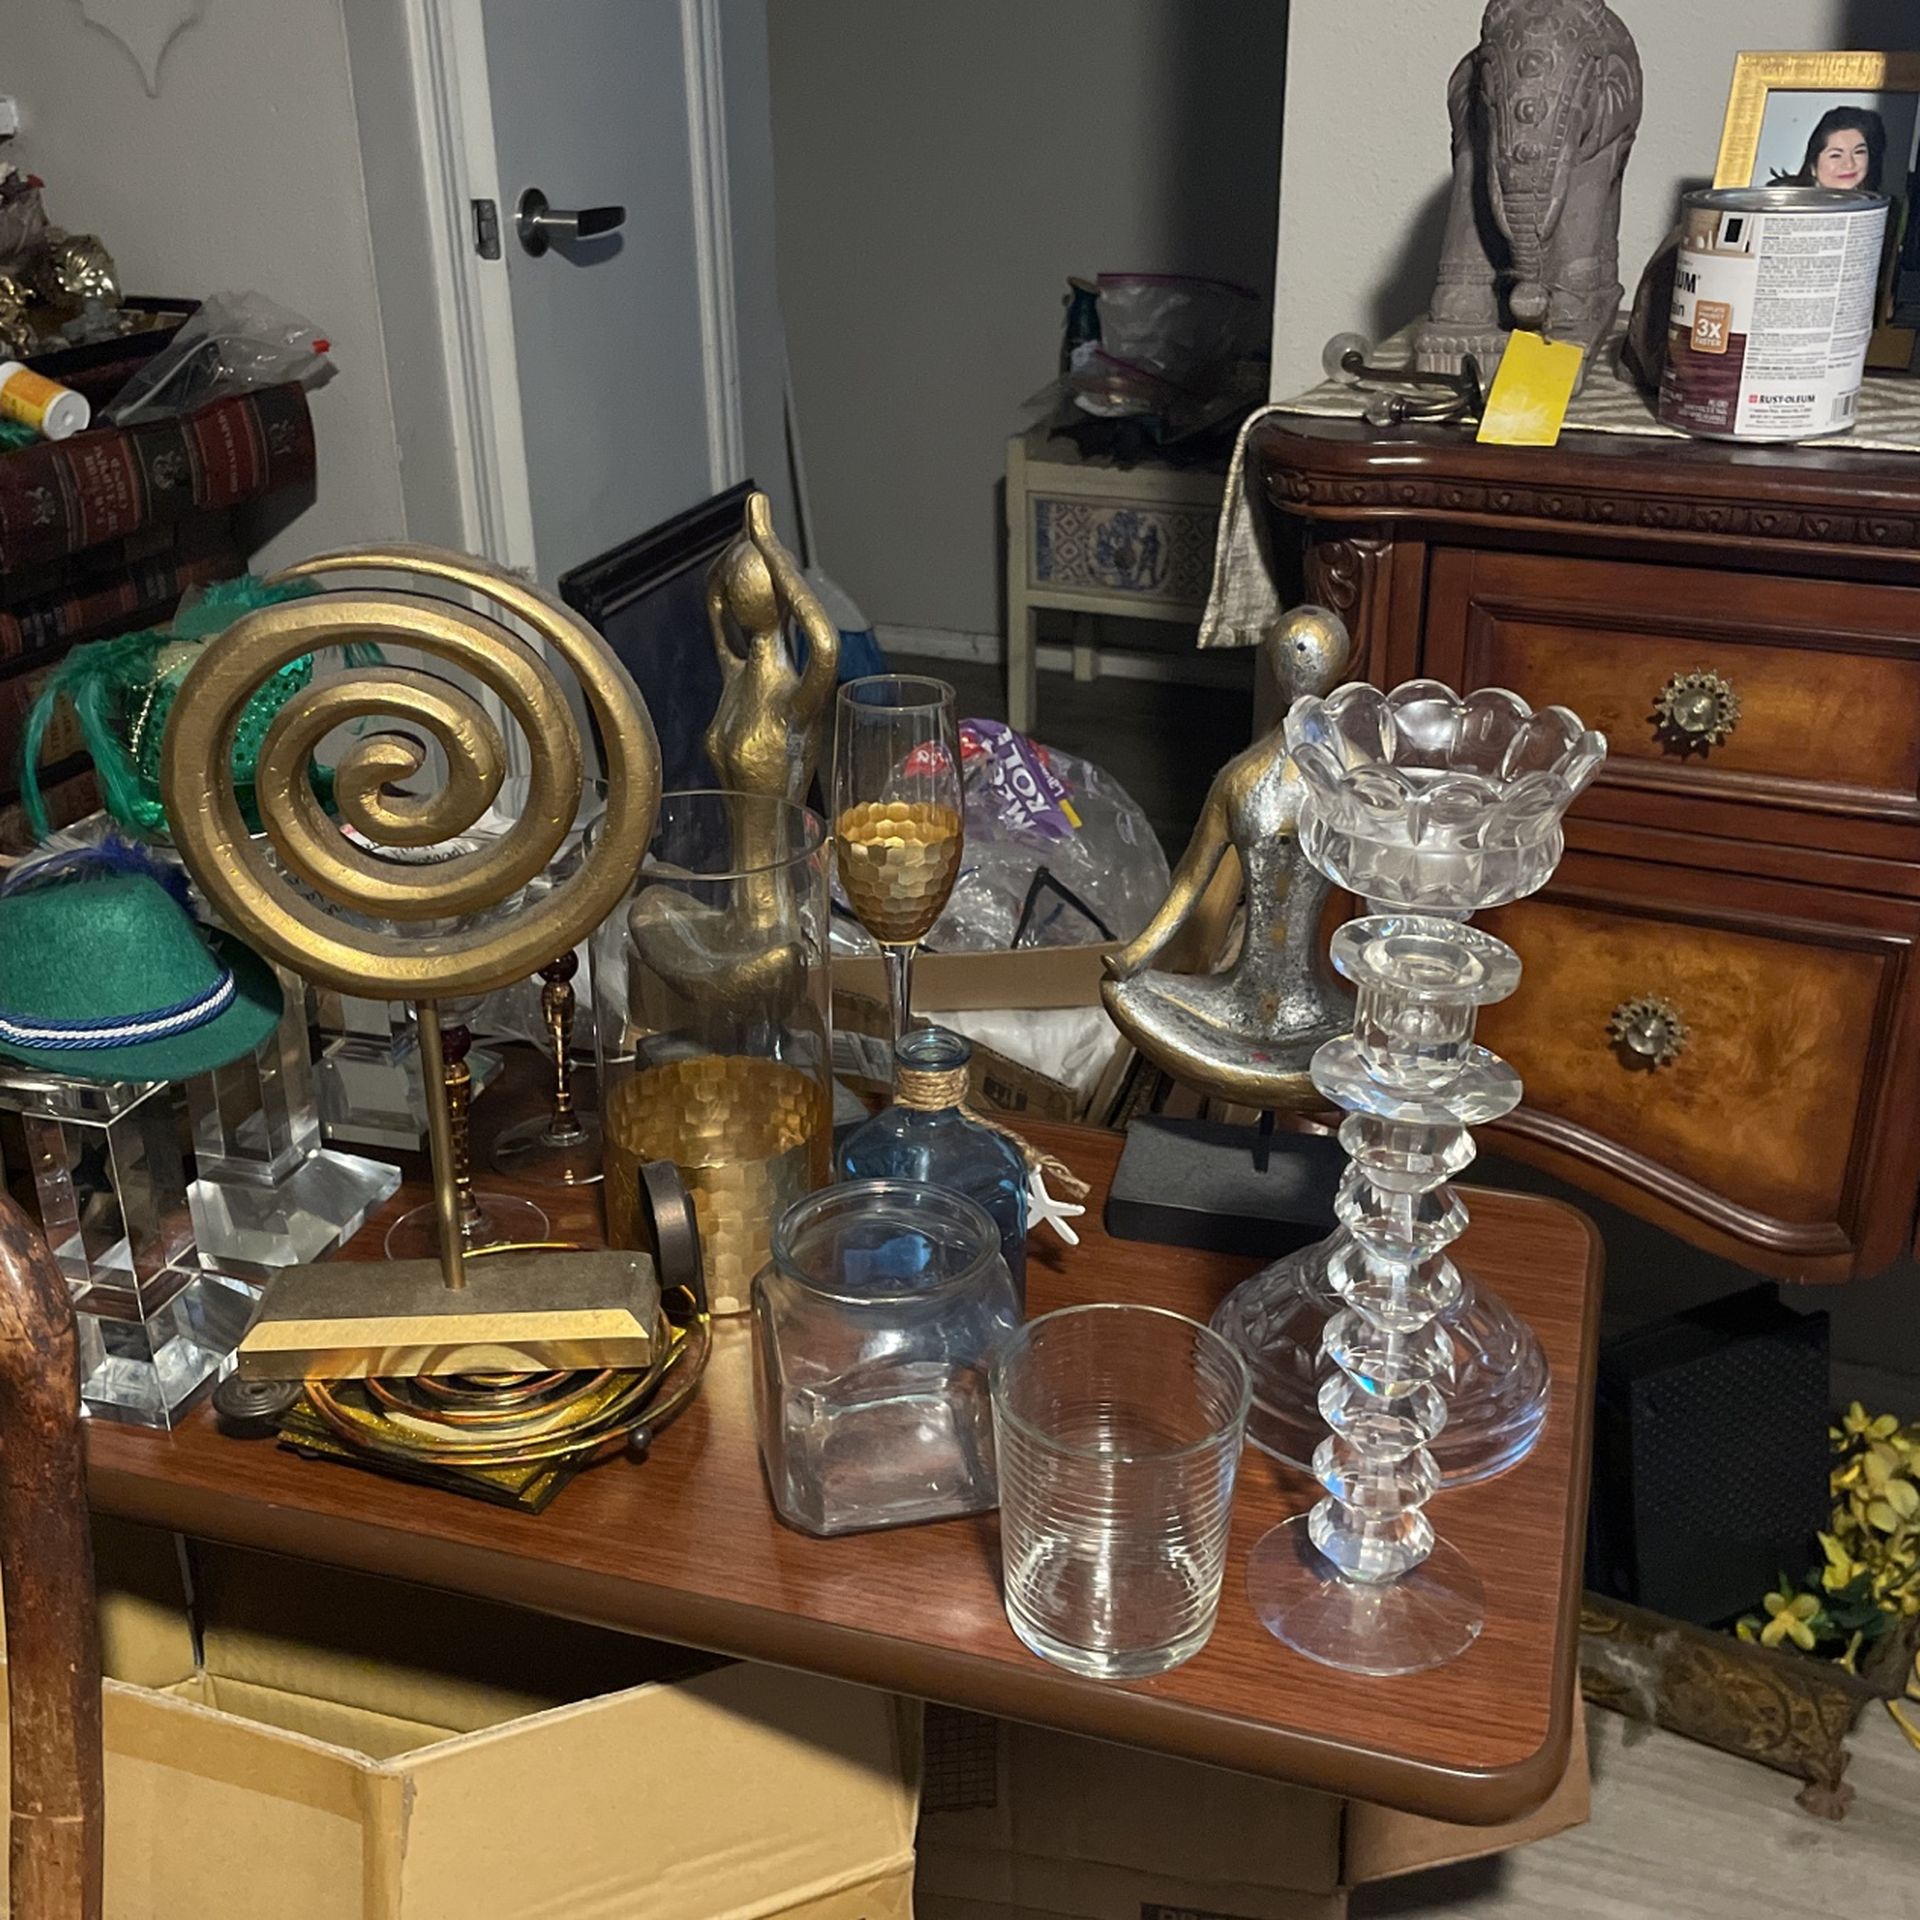 Hodgepodge Of Crystal Candle Holders, And Knickknacks